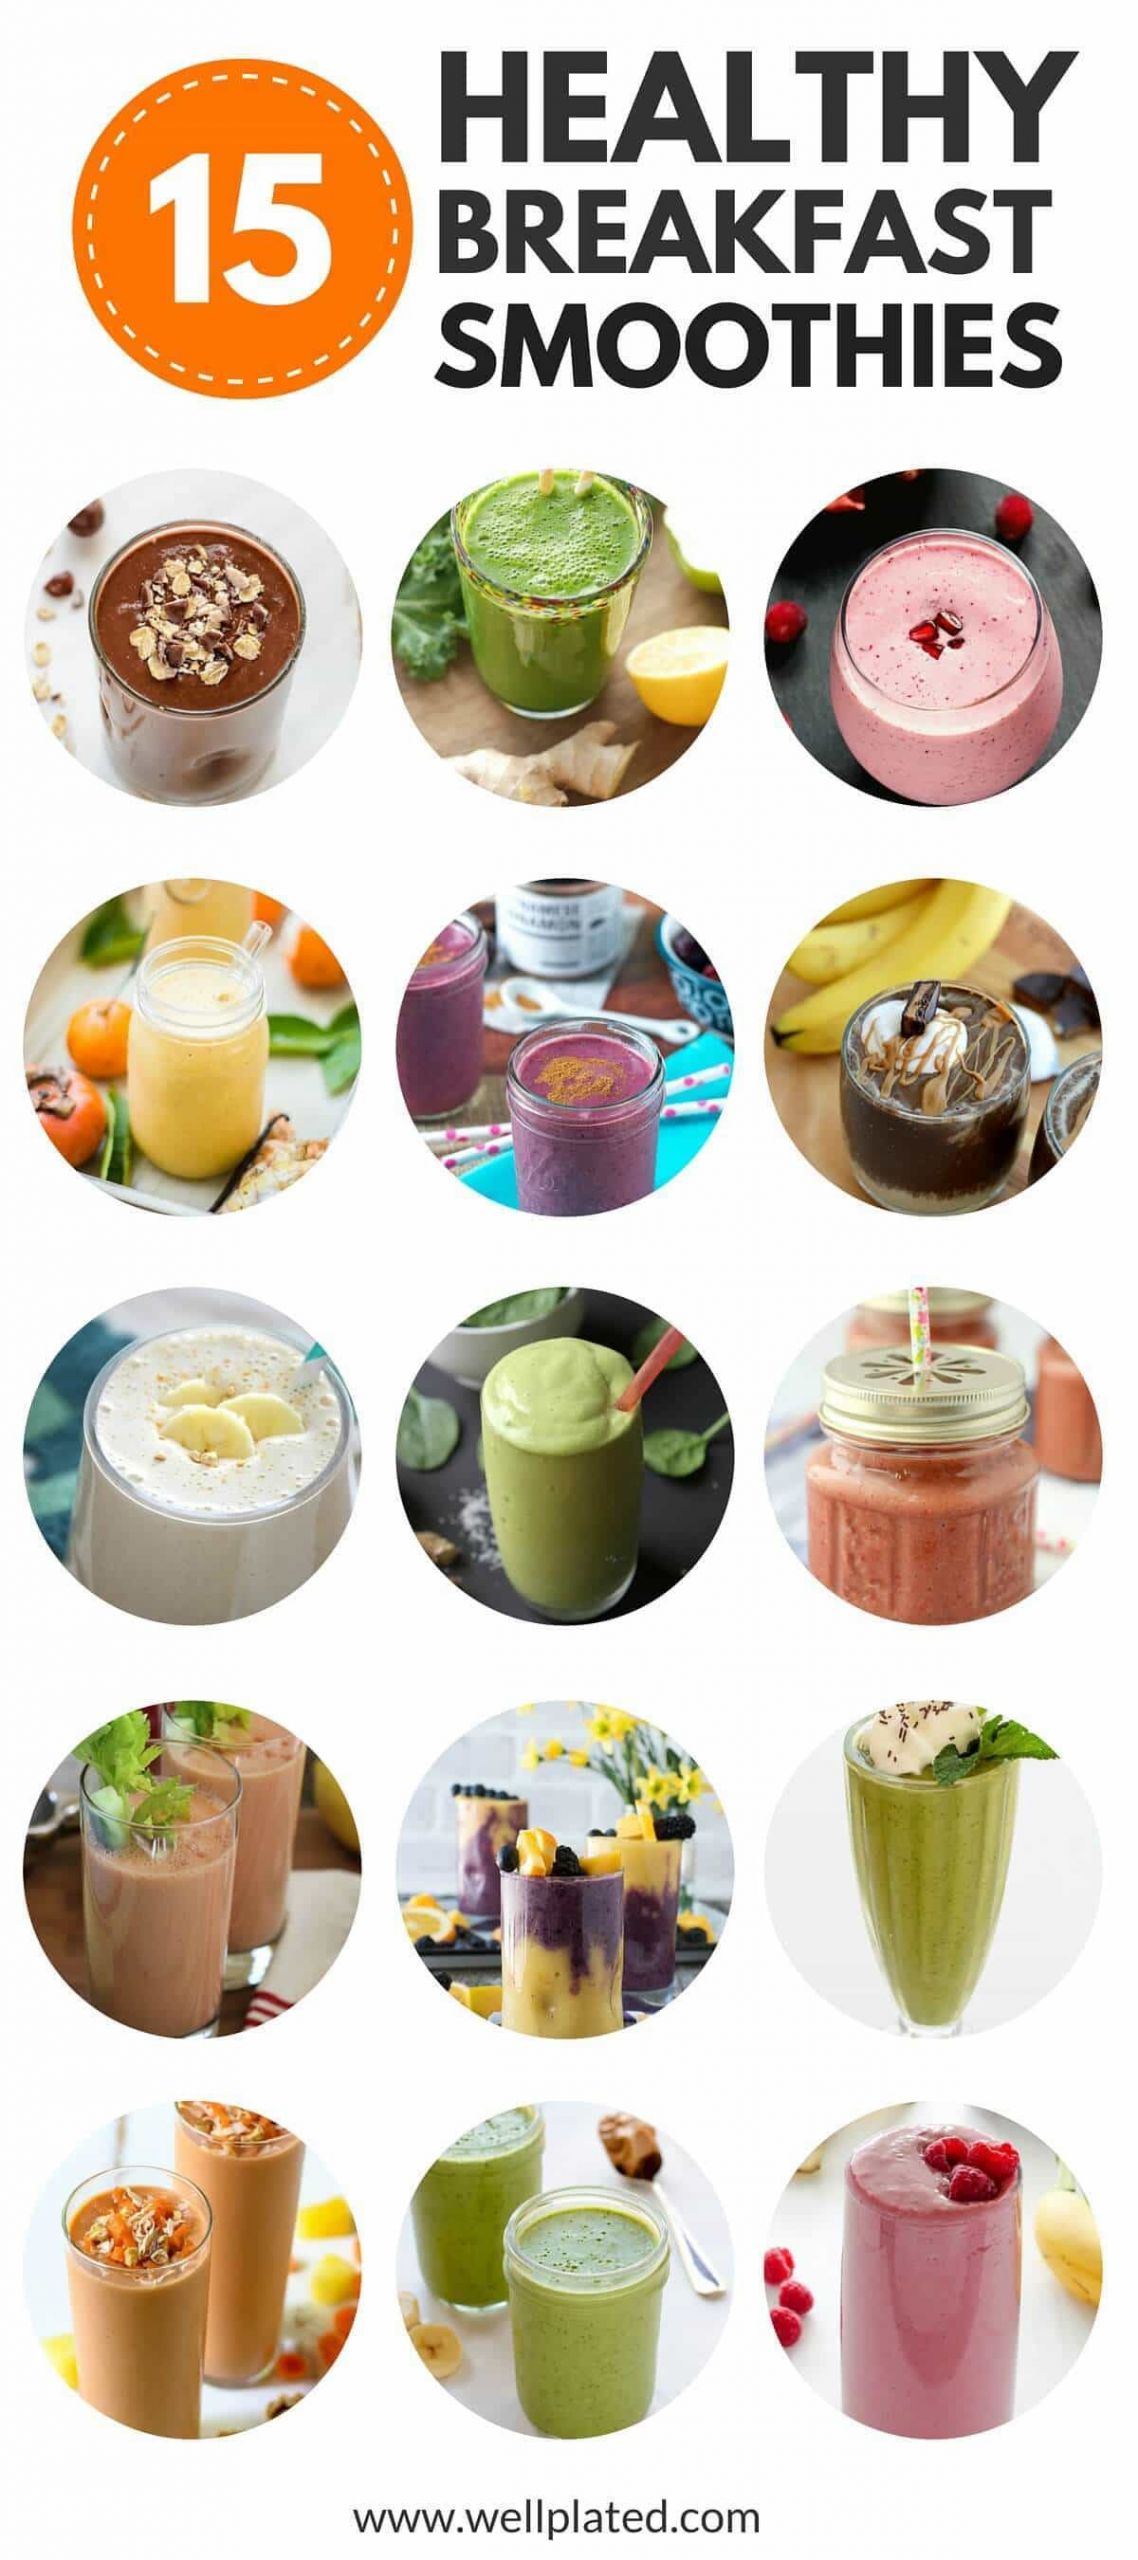 Quick Smoothie Recipes
 The Best 15 Healthy Breakfast Smoothies